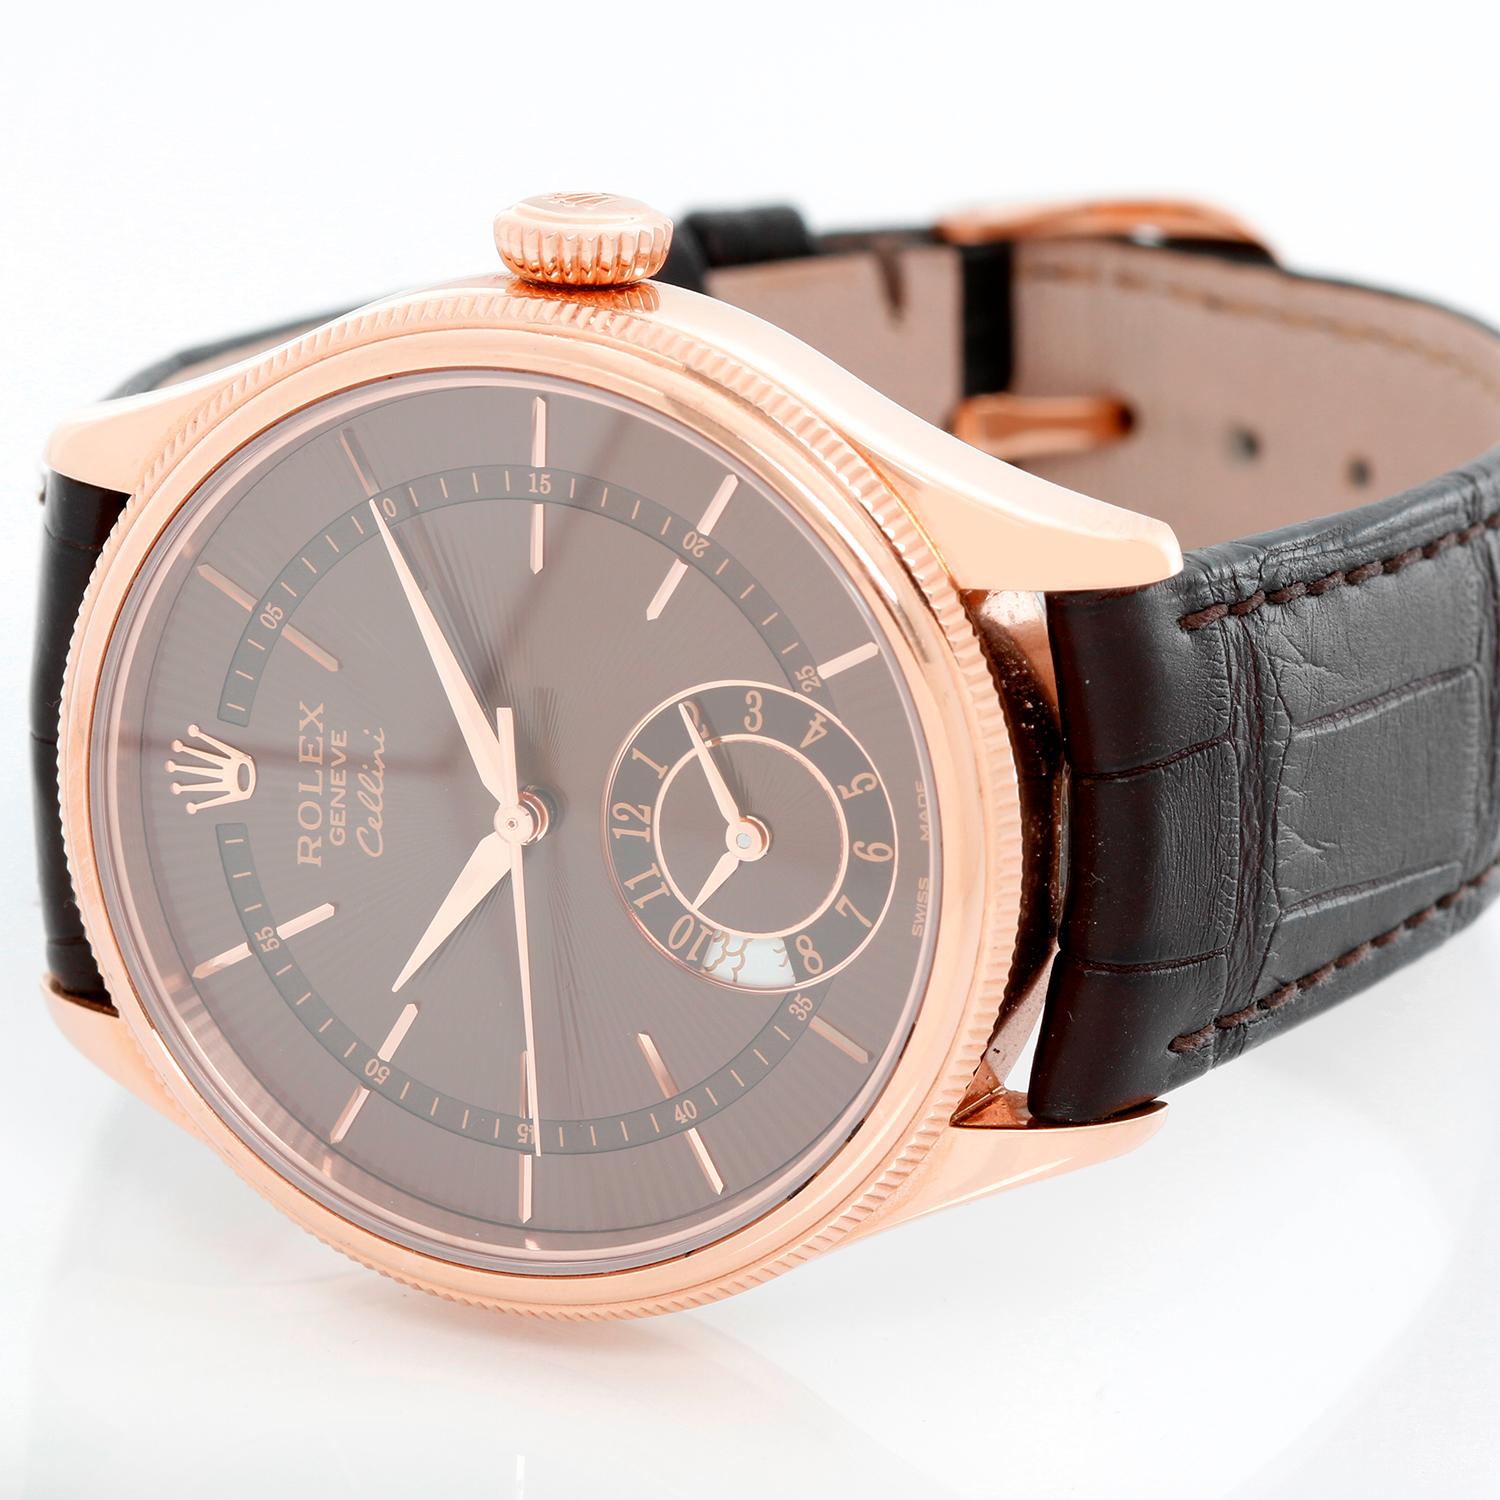 Rolex Cellini Dual Time 18K Rose Gold Men's Watch - Automatic winding . 18K Everrose; Rose Gold ( 39 mm). Chocolate dial with sub dial at 6 o'clock. Brown leather strap with Rose gold deployant clasp. Pre-owned with Rolex box and card. Like new,